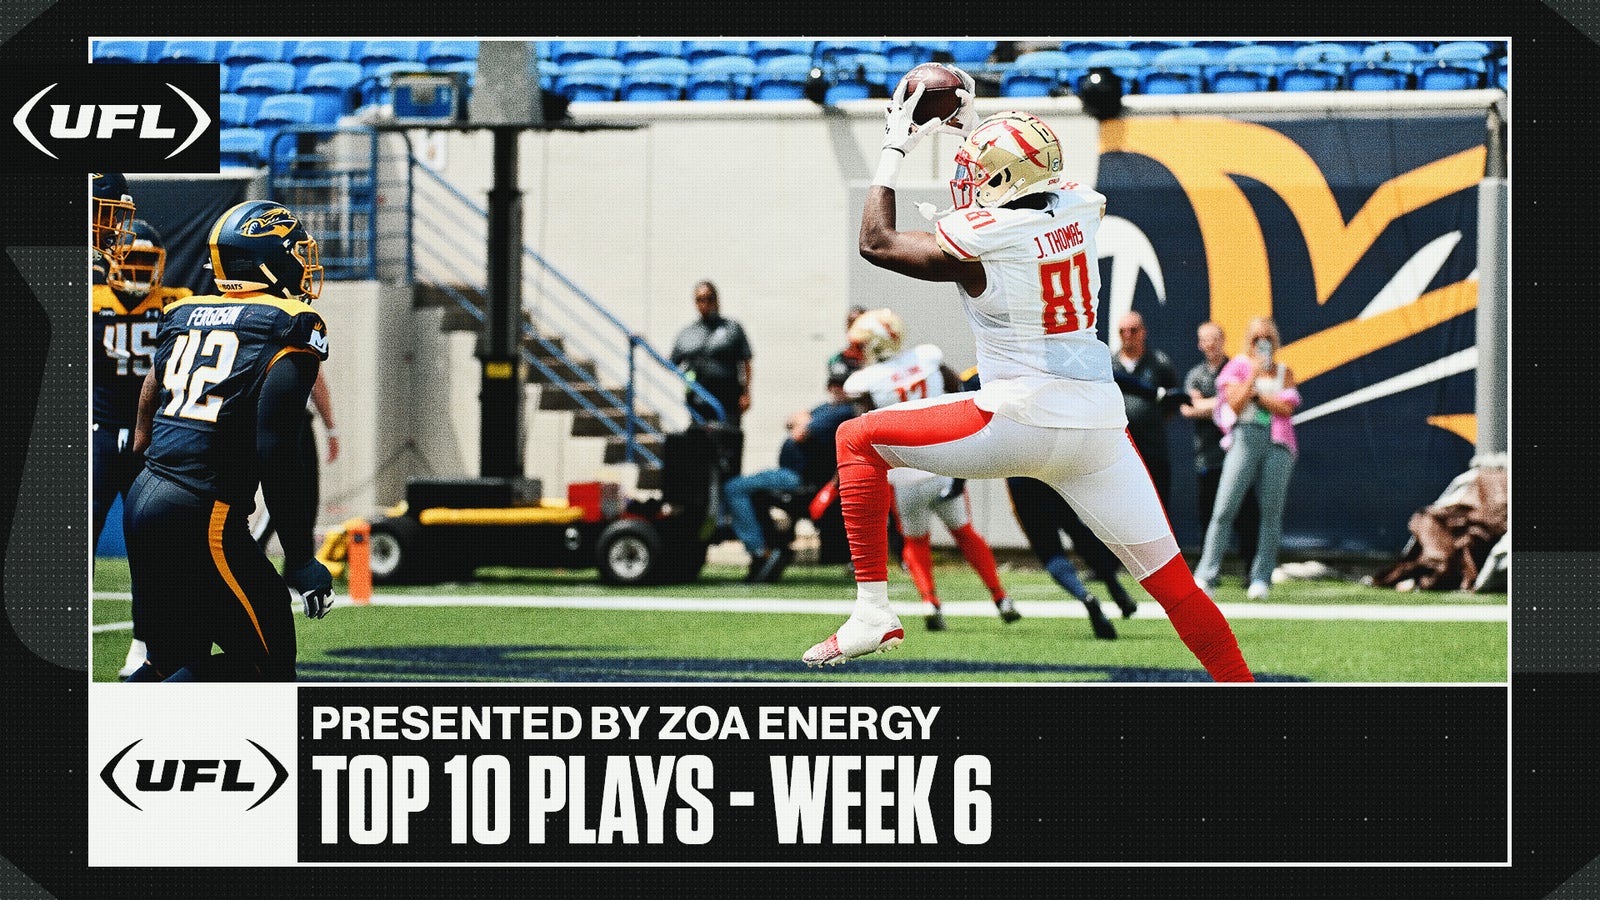 UFL Top 10 Plays from Week 6 | United Football League